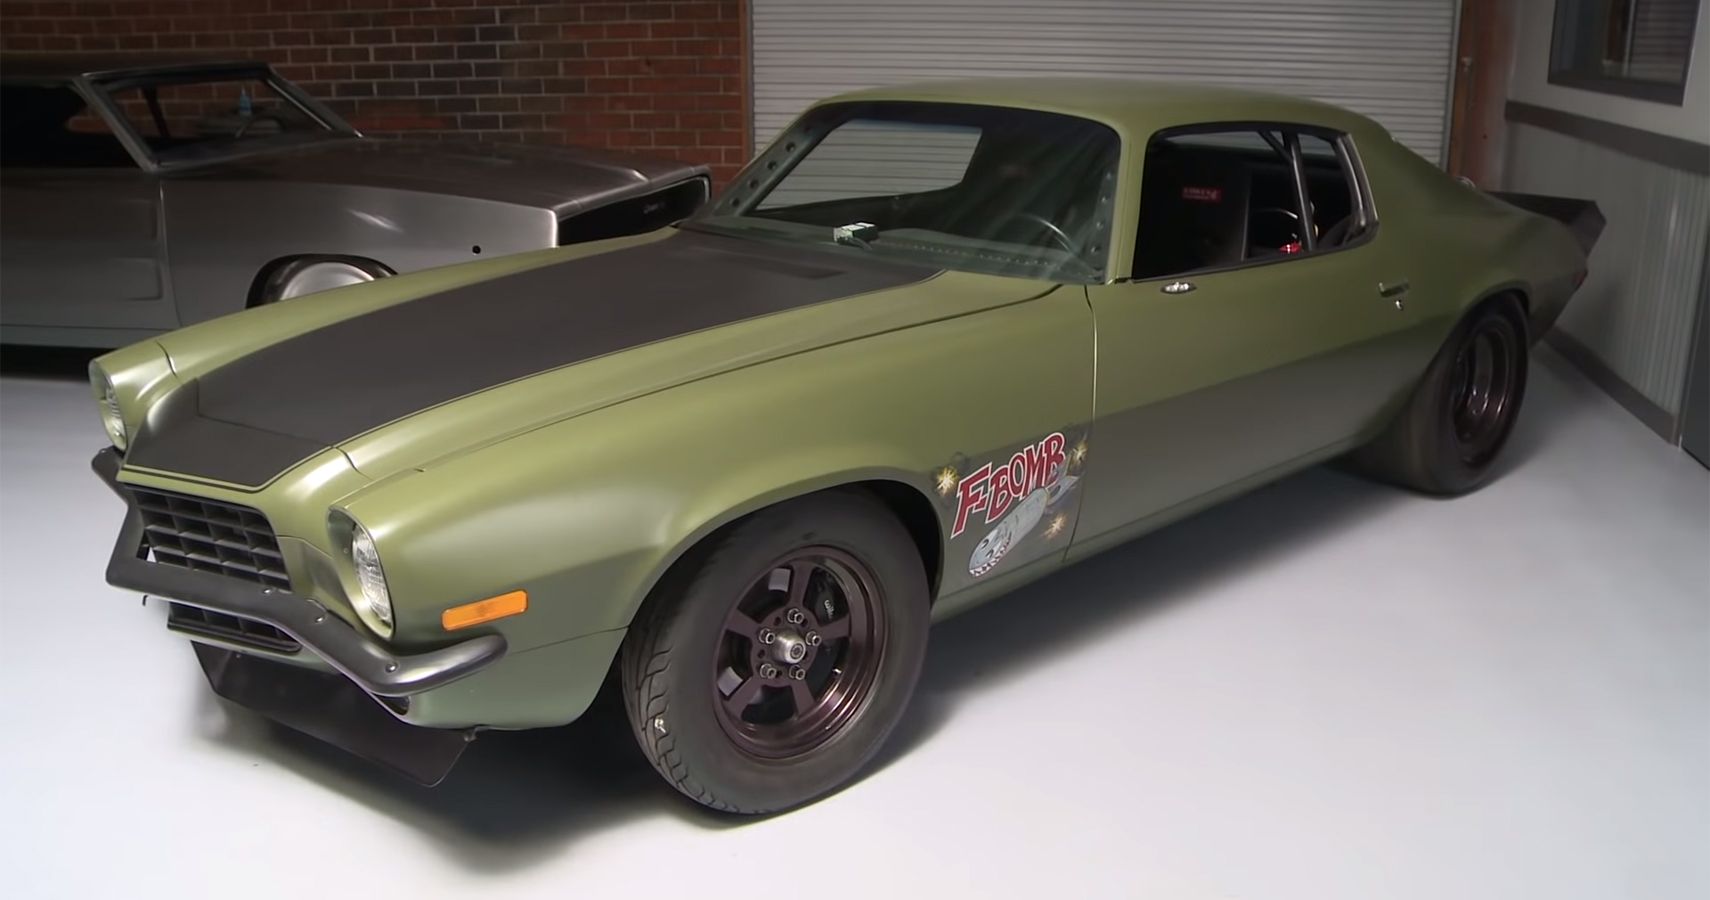 A Detailed Look At The F-Bomb Camaro